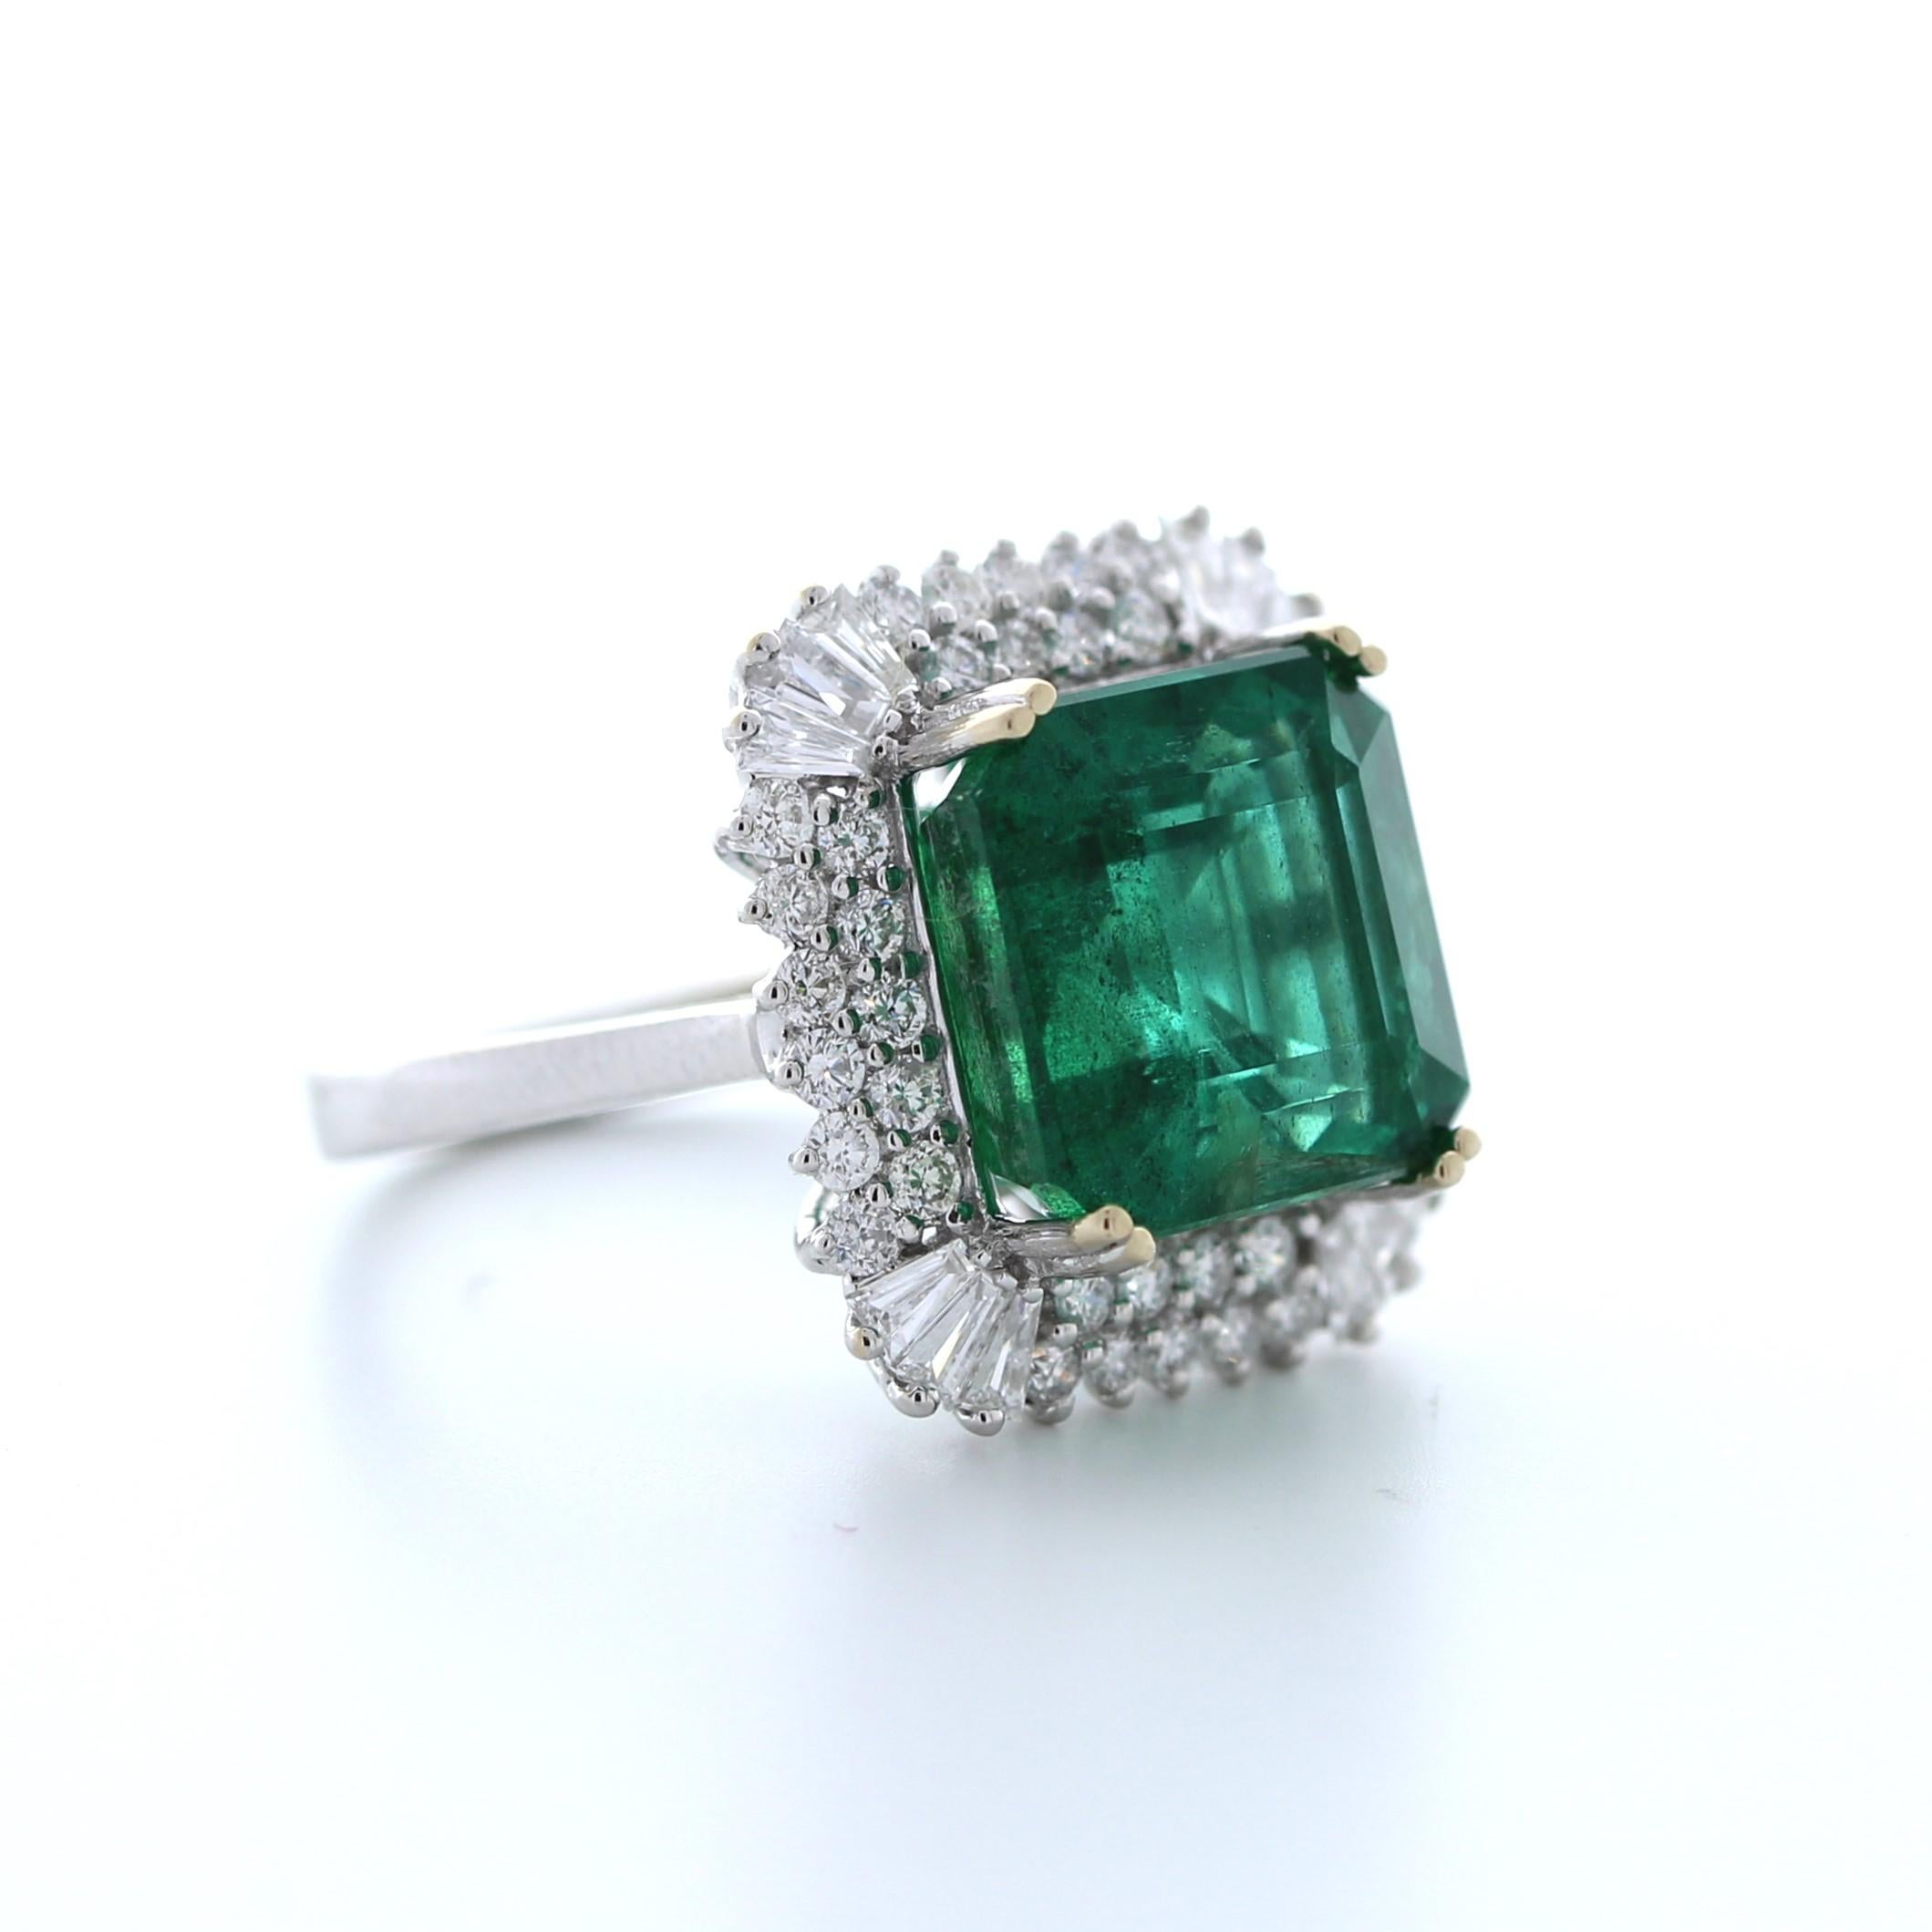 This striking 8.97 carat weight green emerald fashion ring is a true work of art. The emerald is a stunning shade of green and boasts exceptional clarity and brilliance, weighing in at an impressive 8.97 carats. It is set in luxurious 18K white gold